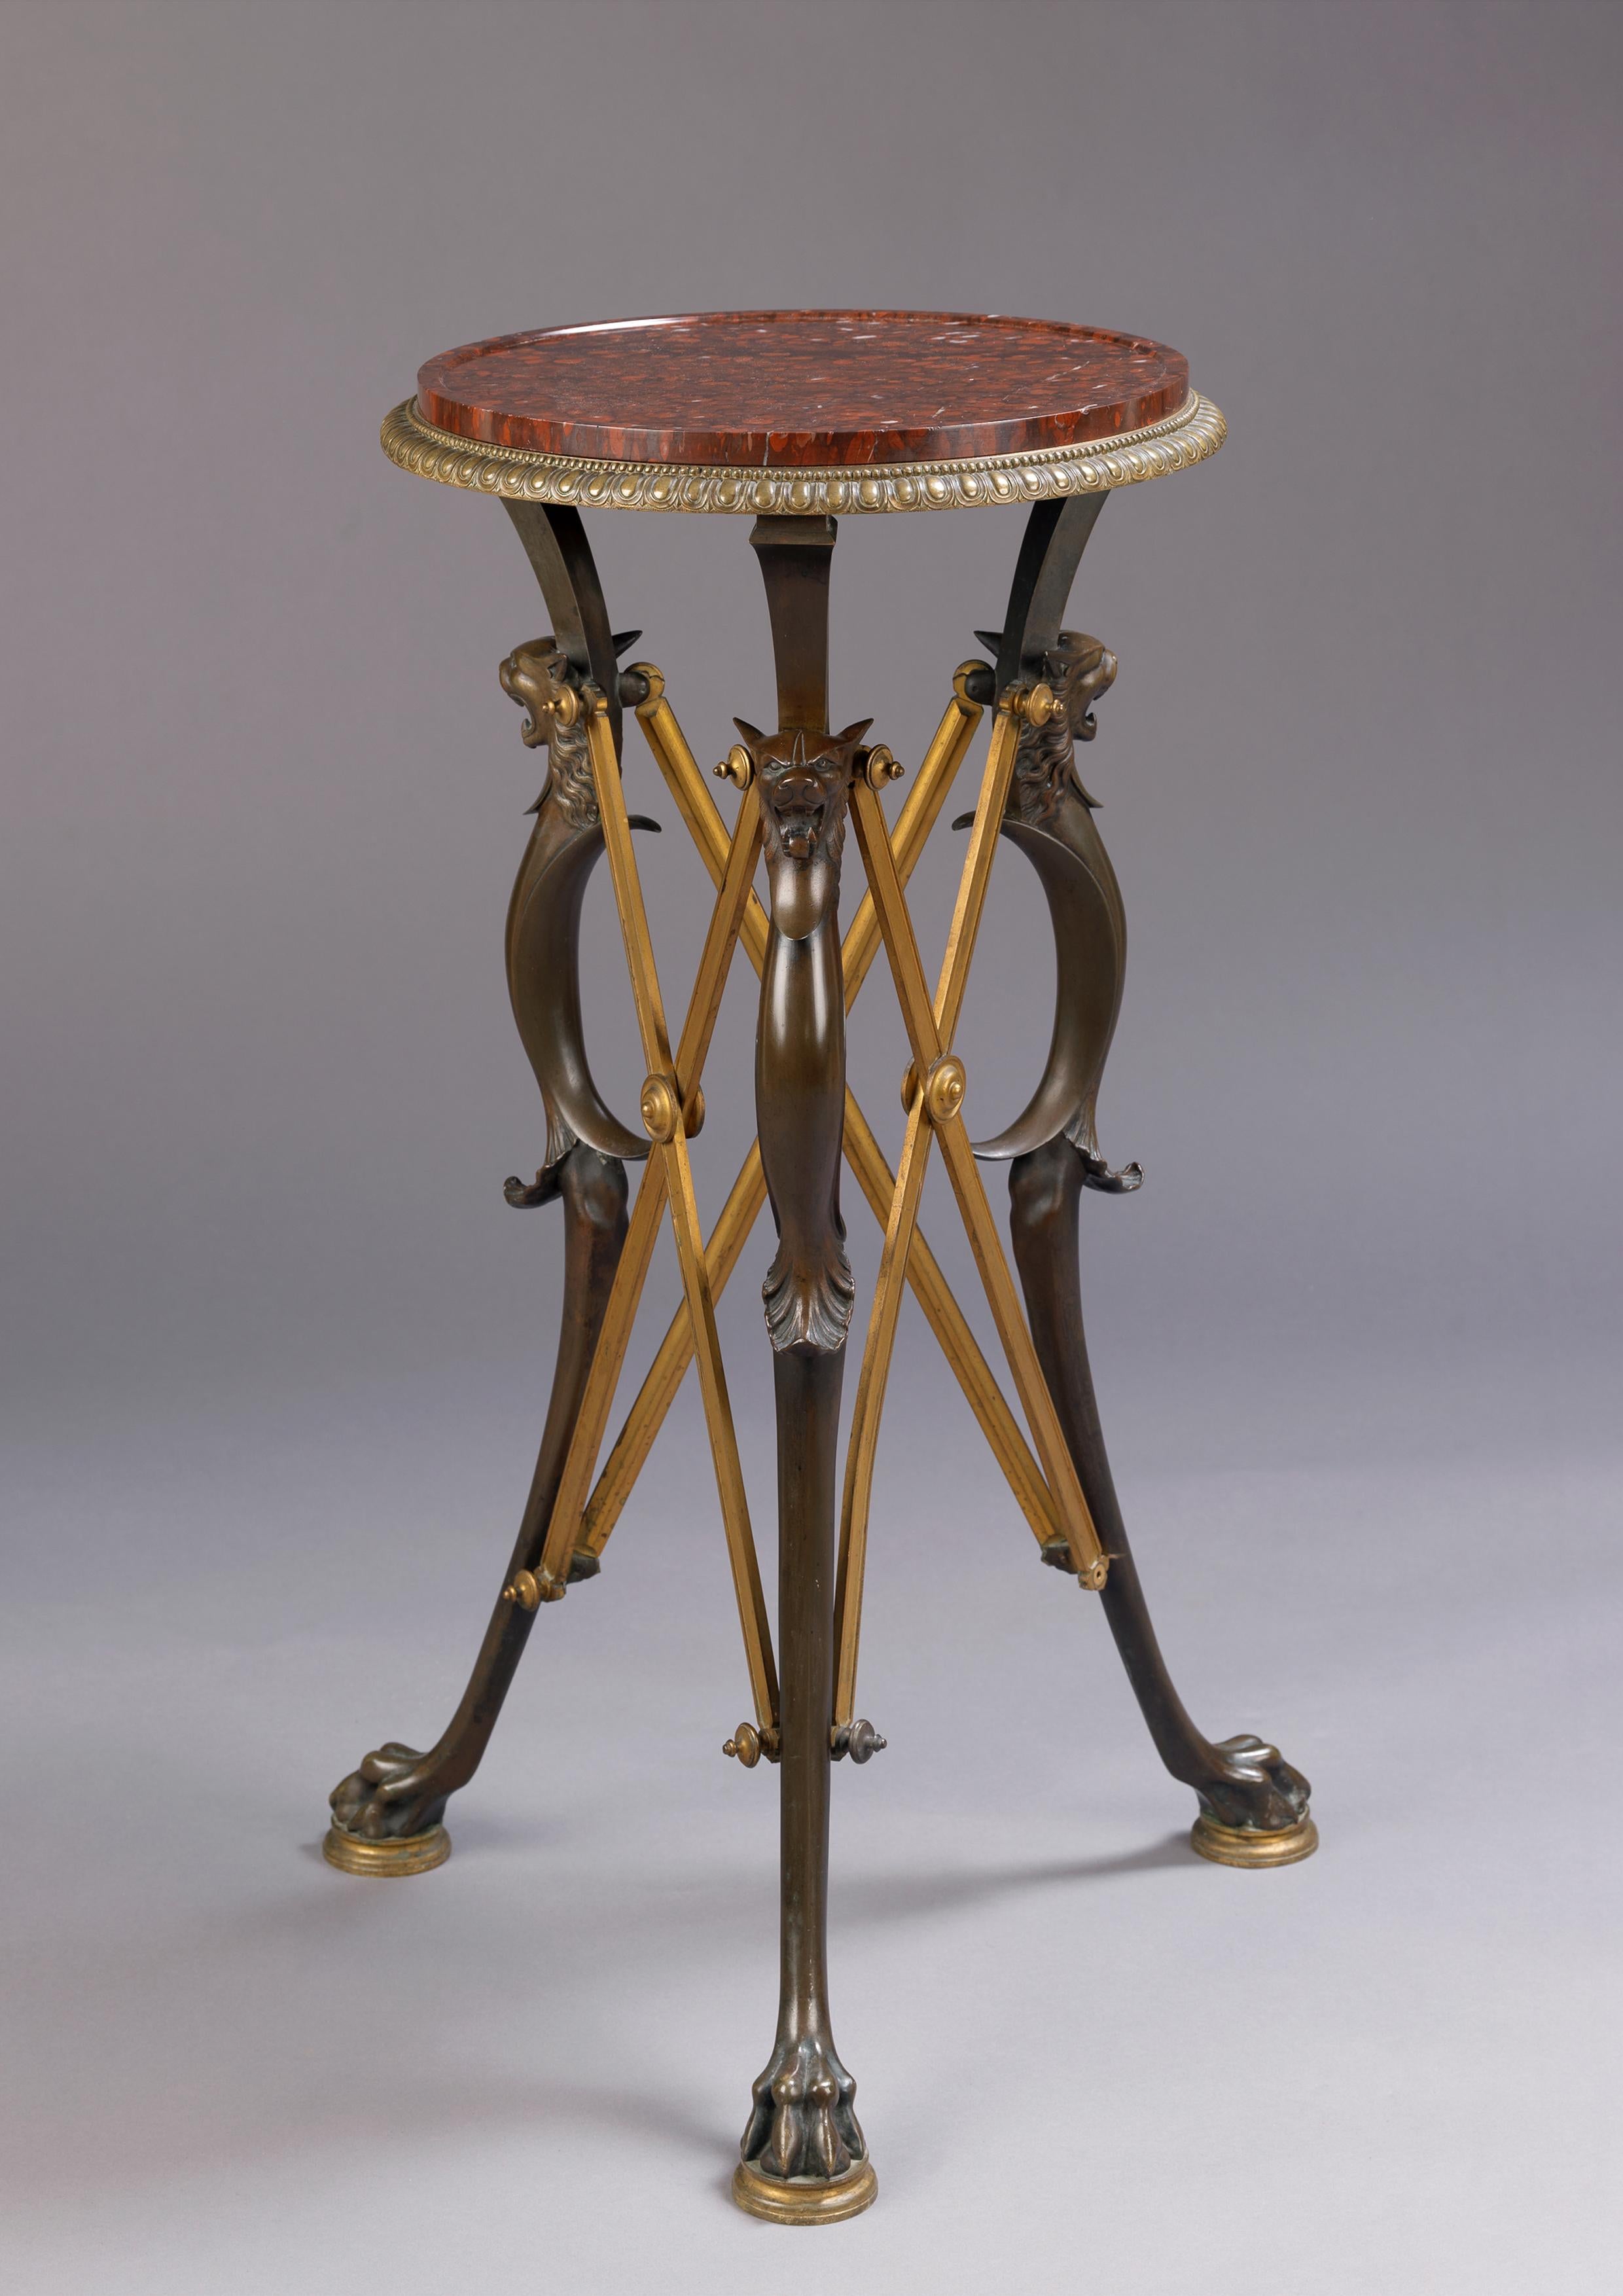 A fine neoclassical patinated and gilt bronze gueridon with a rouge griotte marble top, attributed to Barbedienne and Ferdinand Levillain. 

French, circa 1890. 

This striking gueridon has a circular inset rouge griotte marble top within a gilt